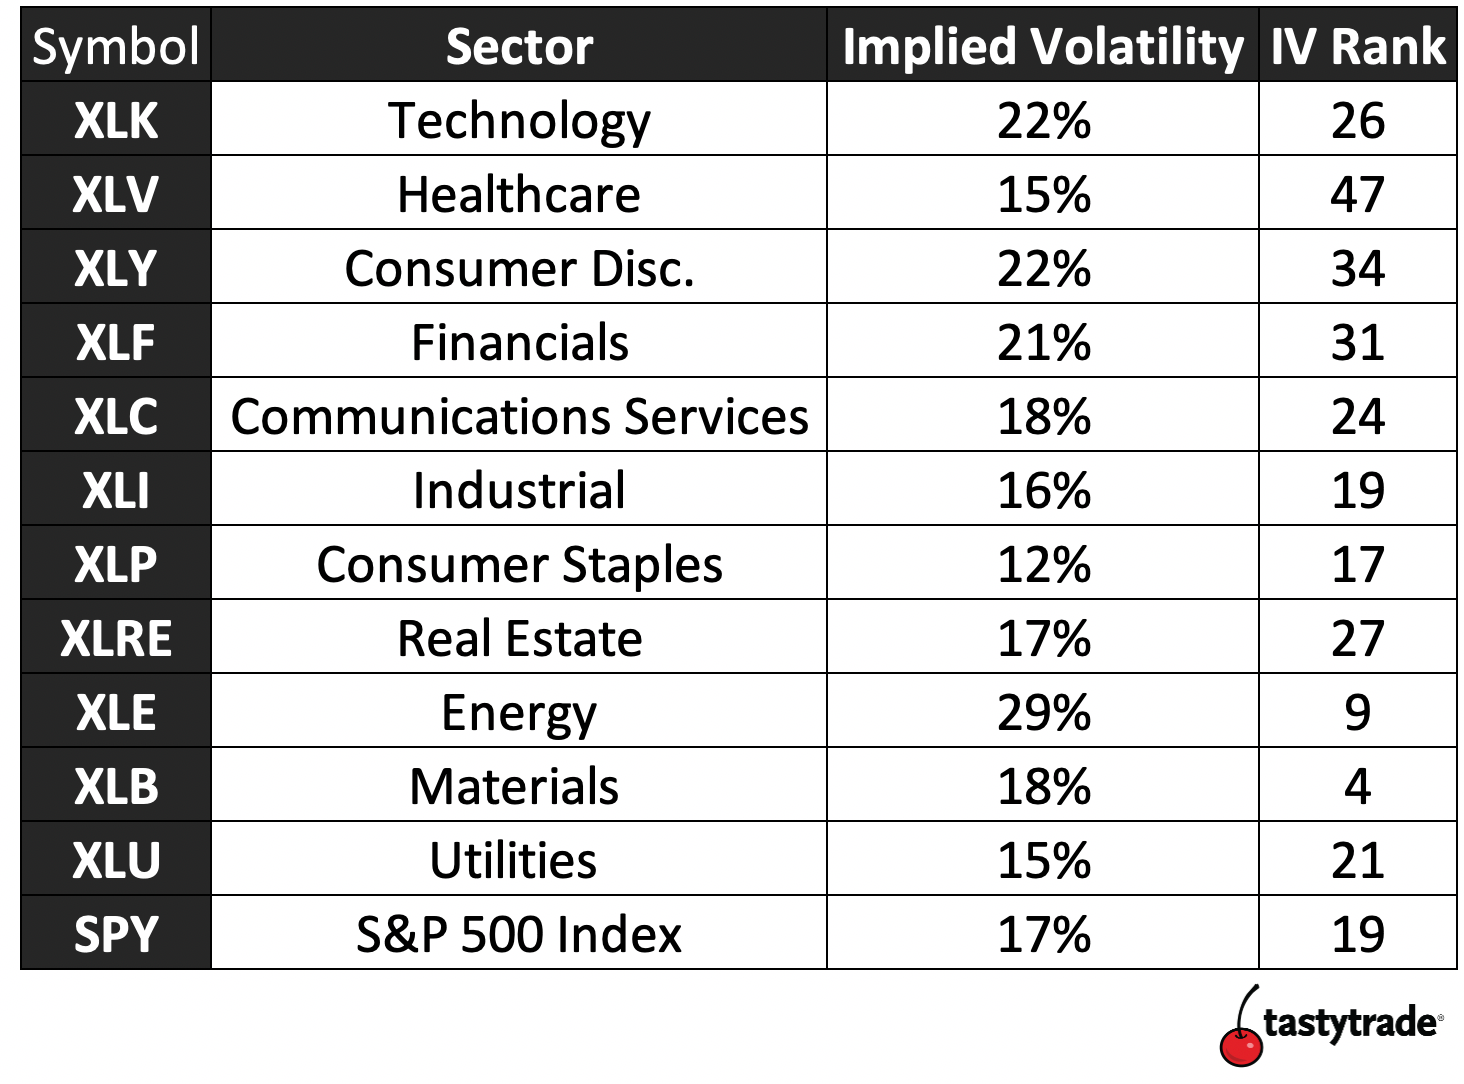 Implied Volatility of S&P Sectors